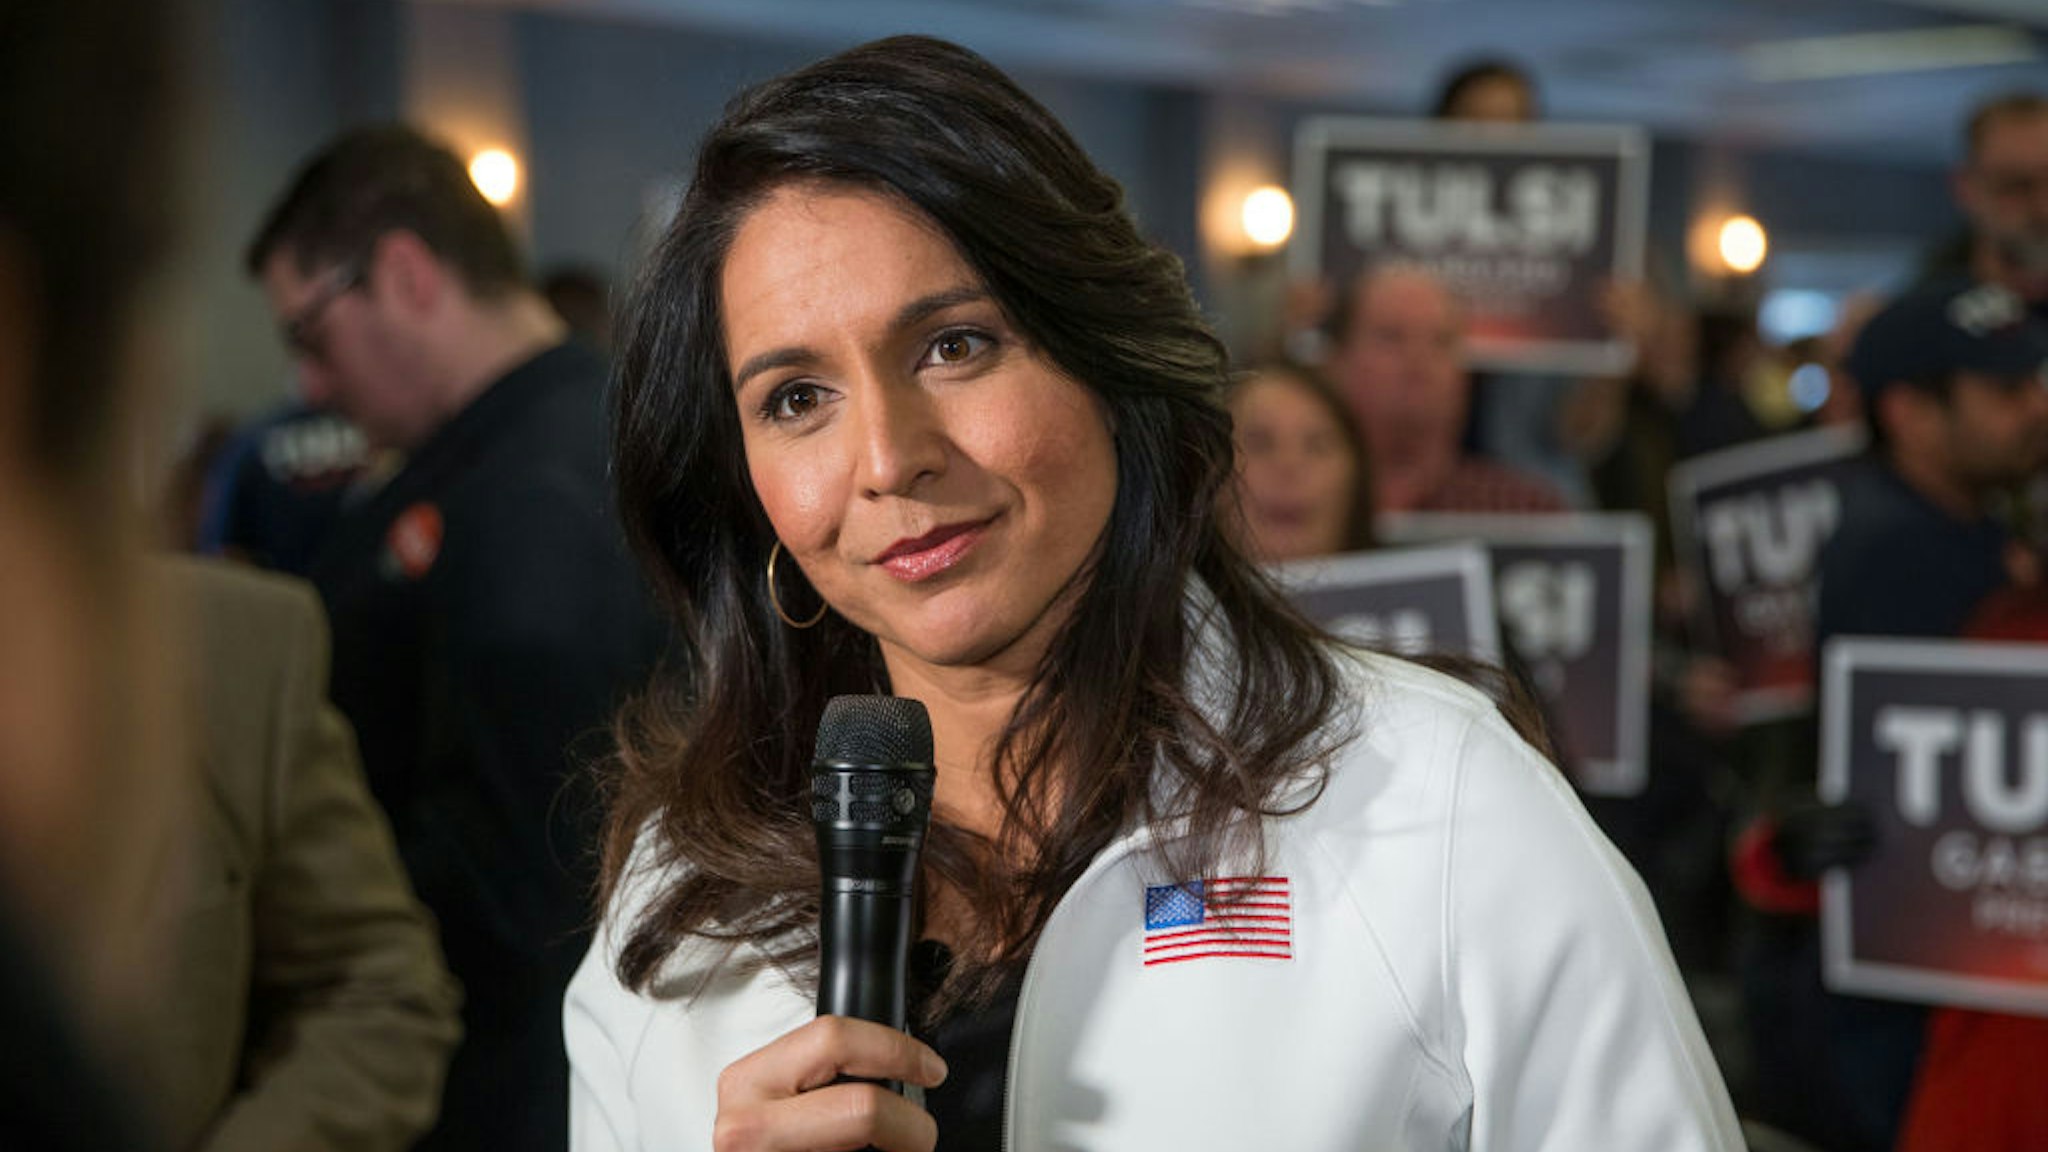 PORTSMOUTH, NH - FEBRUARY 09: Democratic presidential candidate Rep. Tulsi Gabbard (D-HI) answers media questions following a campaign event on February 9, 2020 in Portsmouth, New Hampshire. The first in the nation primary is on Tuesday, February 11. (Photo by Scott Eisen/Getty Images)